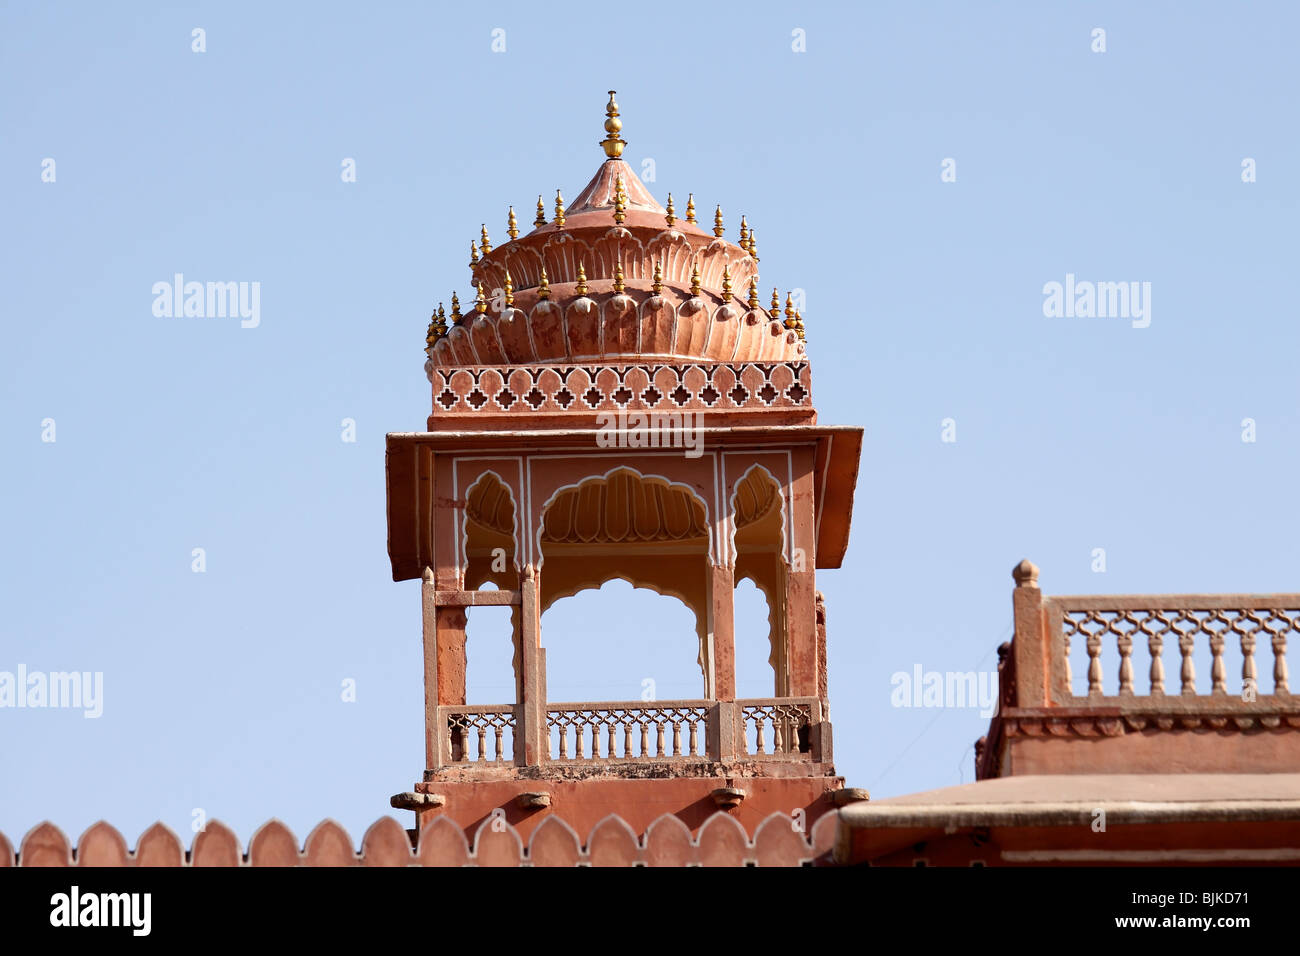 Sights & scenes from Rajasthan : Jaipur Stock Photo